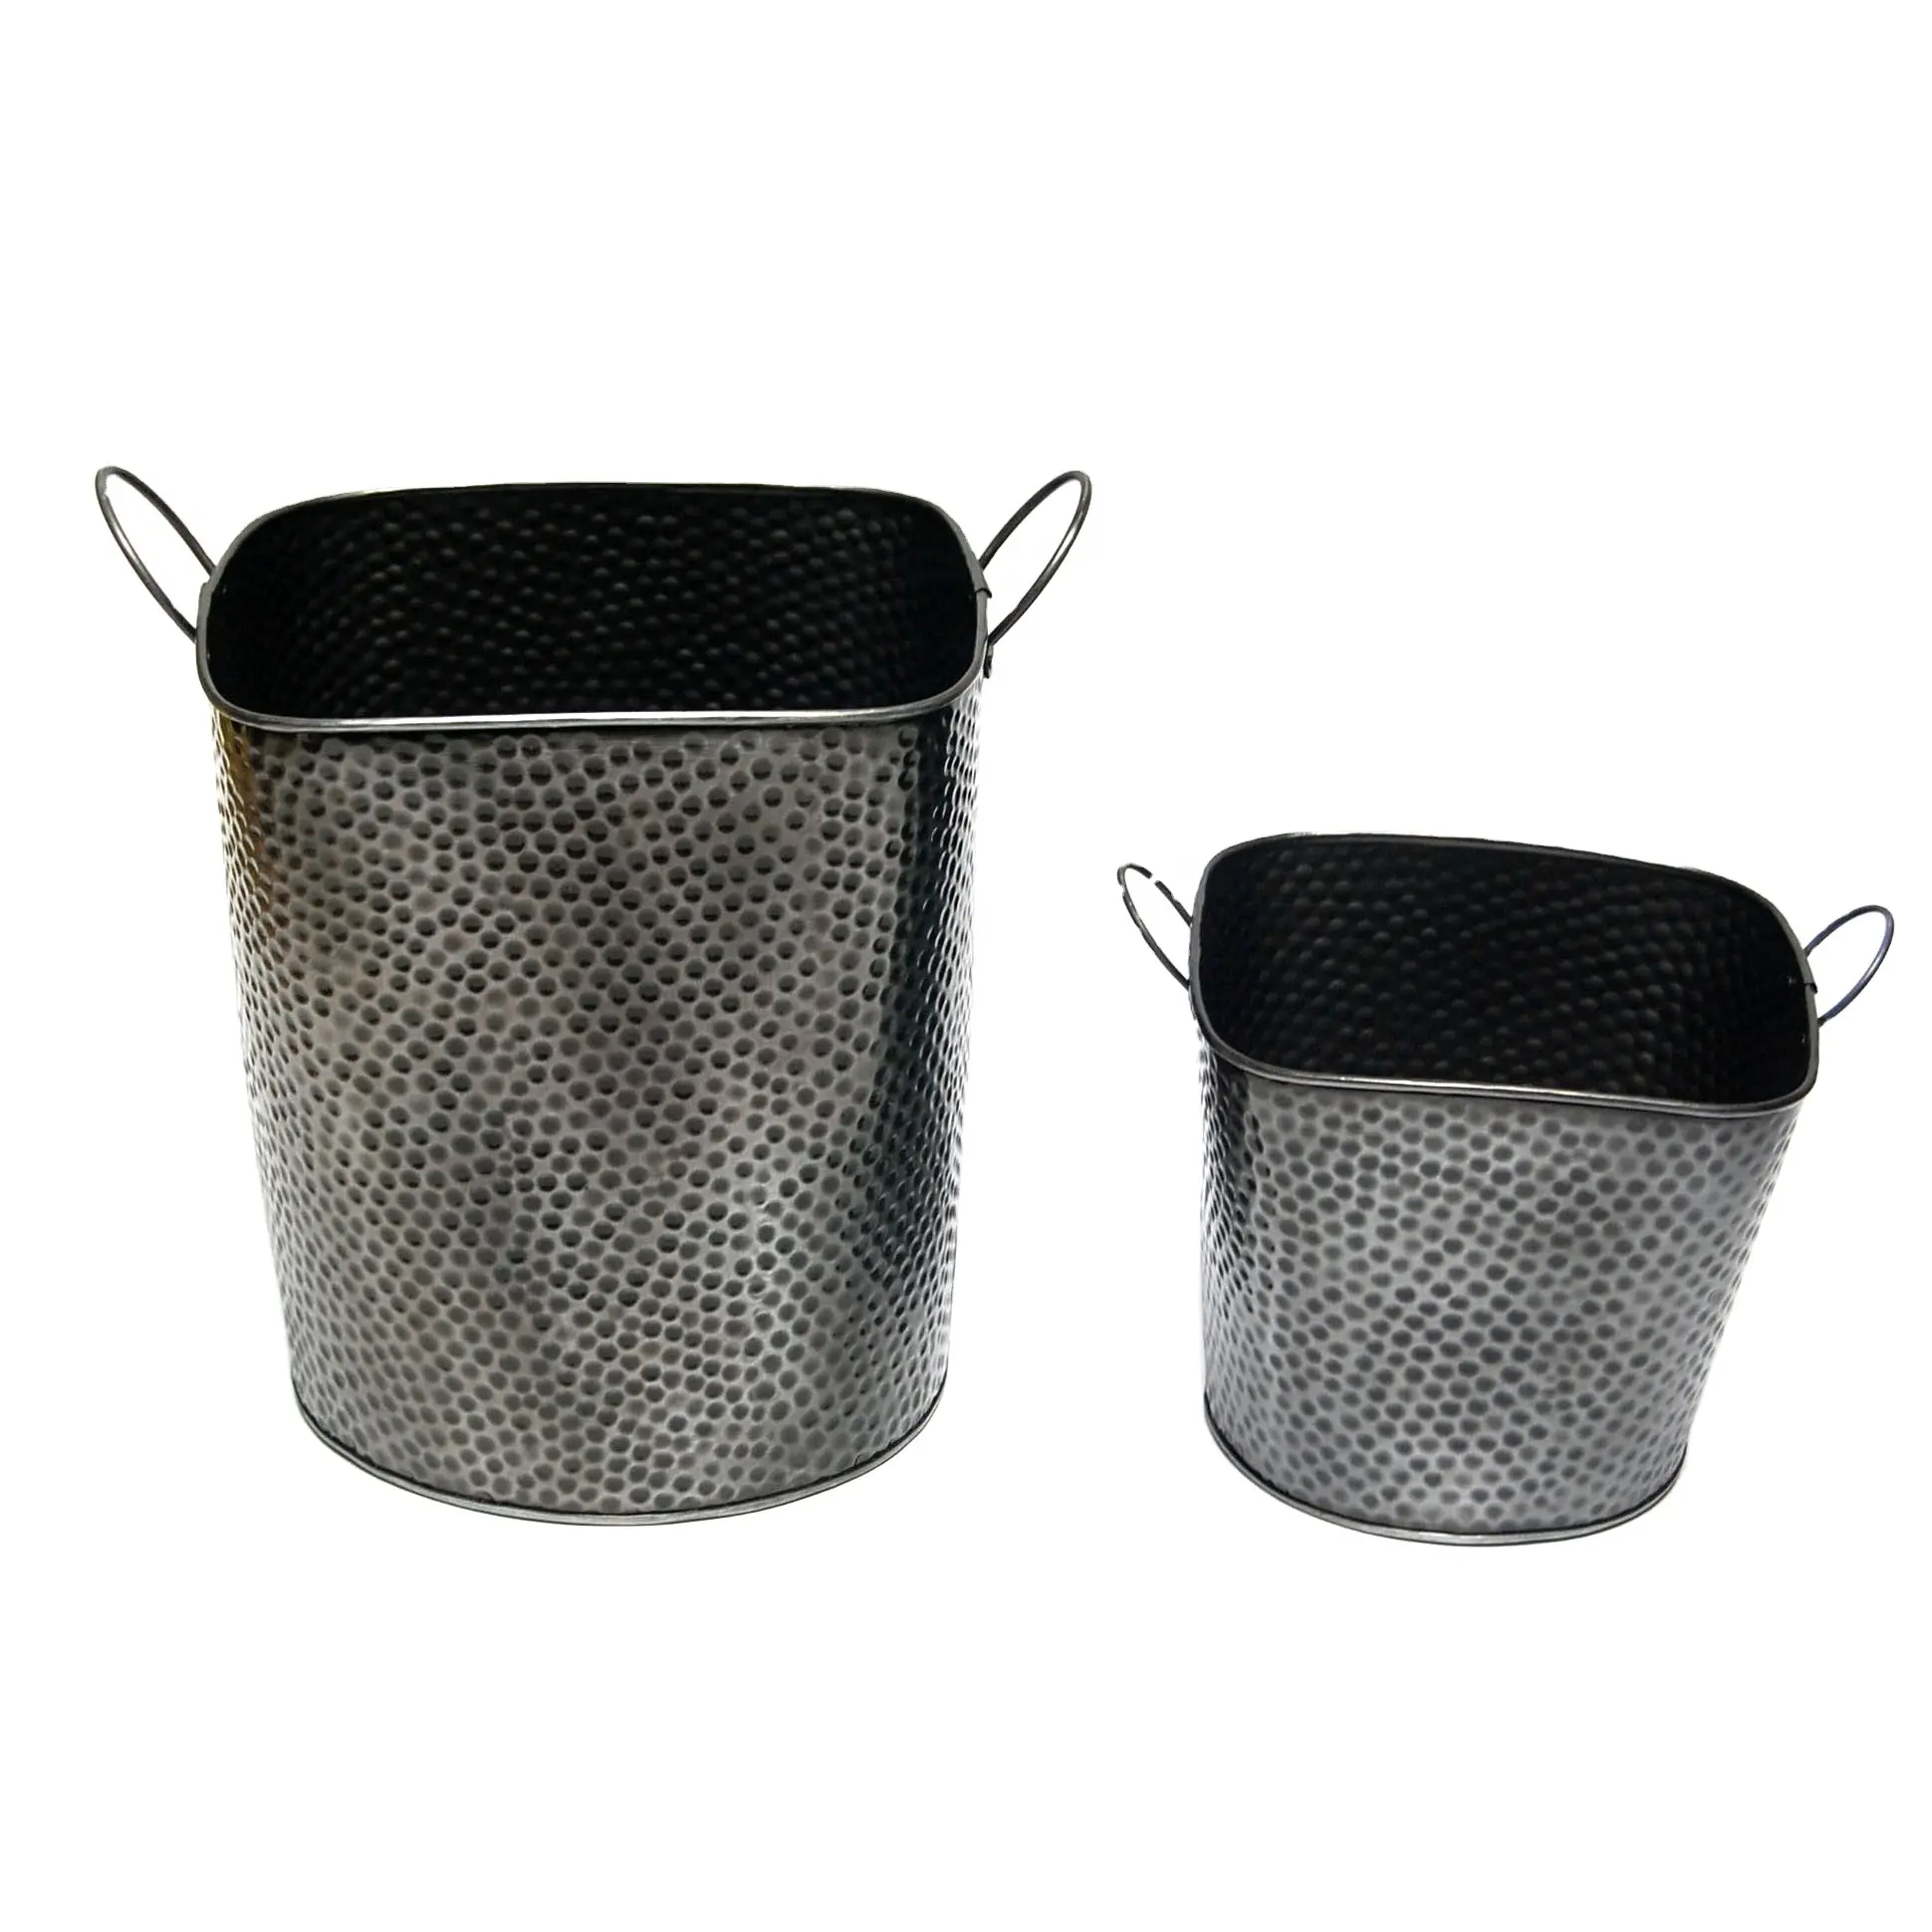 Factory Direct Supplies Iron Square Hammered Bucket Set Of 2 With Black Antique Color For Sale